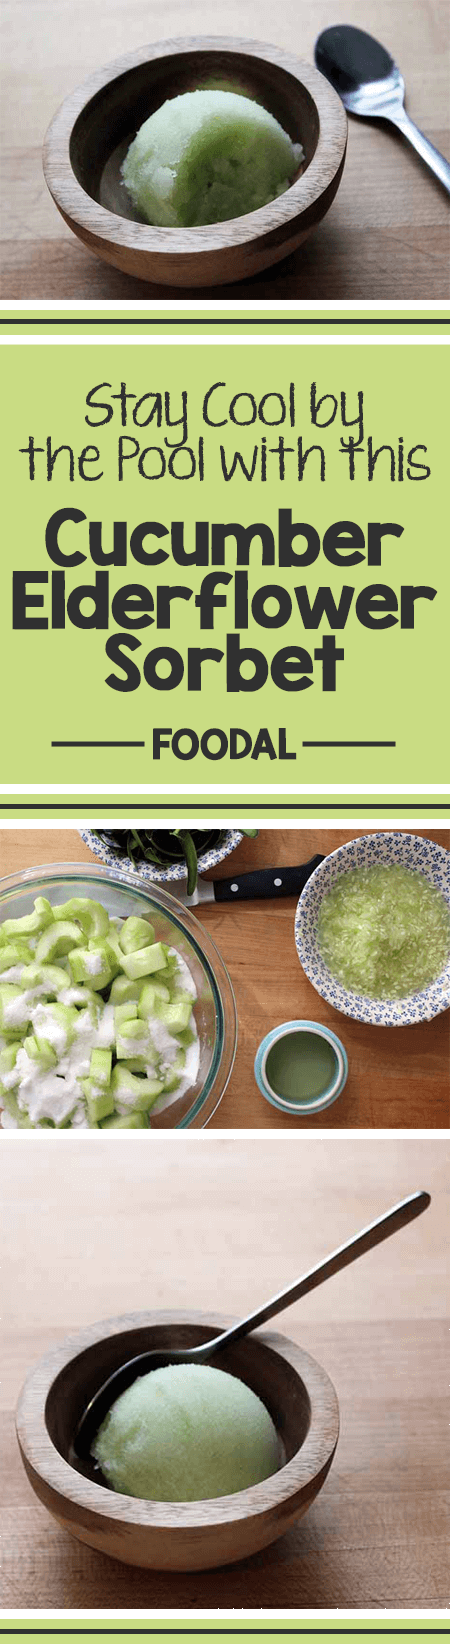 Keep cool this summer with homemade cucumber elderflower sorbet. This delightful flavor pairing makes for a refreshing afternoon snack or a sweet close to a cookout. Check out our recipe to learn a fun way to eat your vegetables for dessert. https://foodal.com/recipes/desserts/cucumber-elderflower-sorbet/